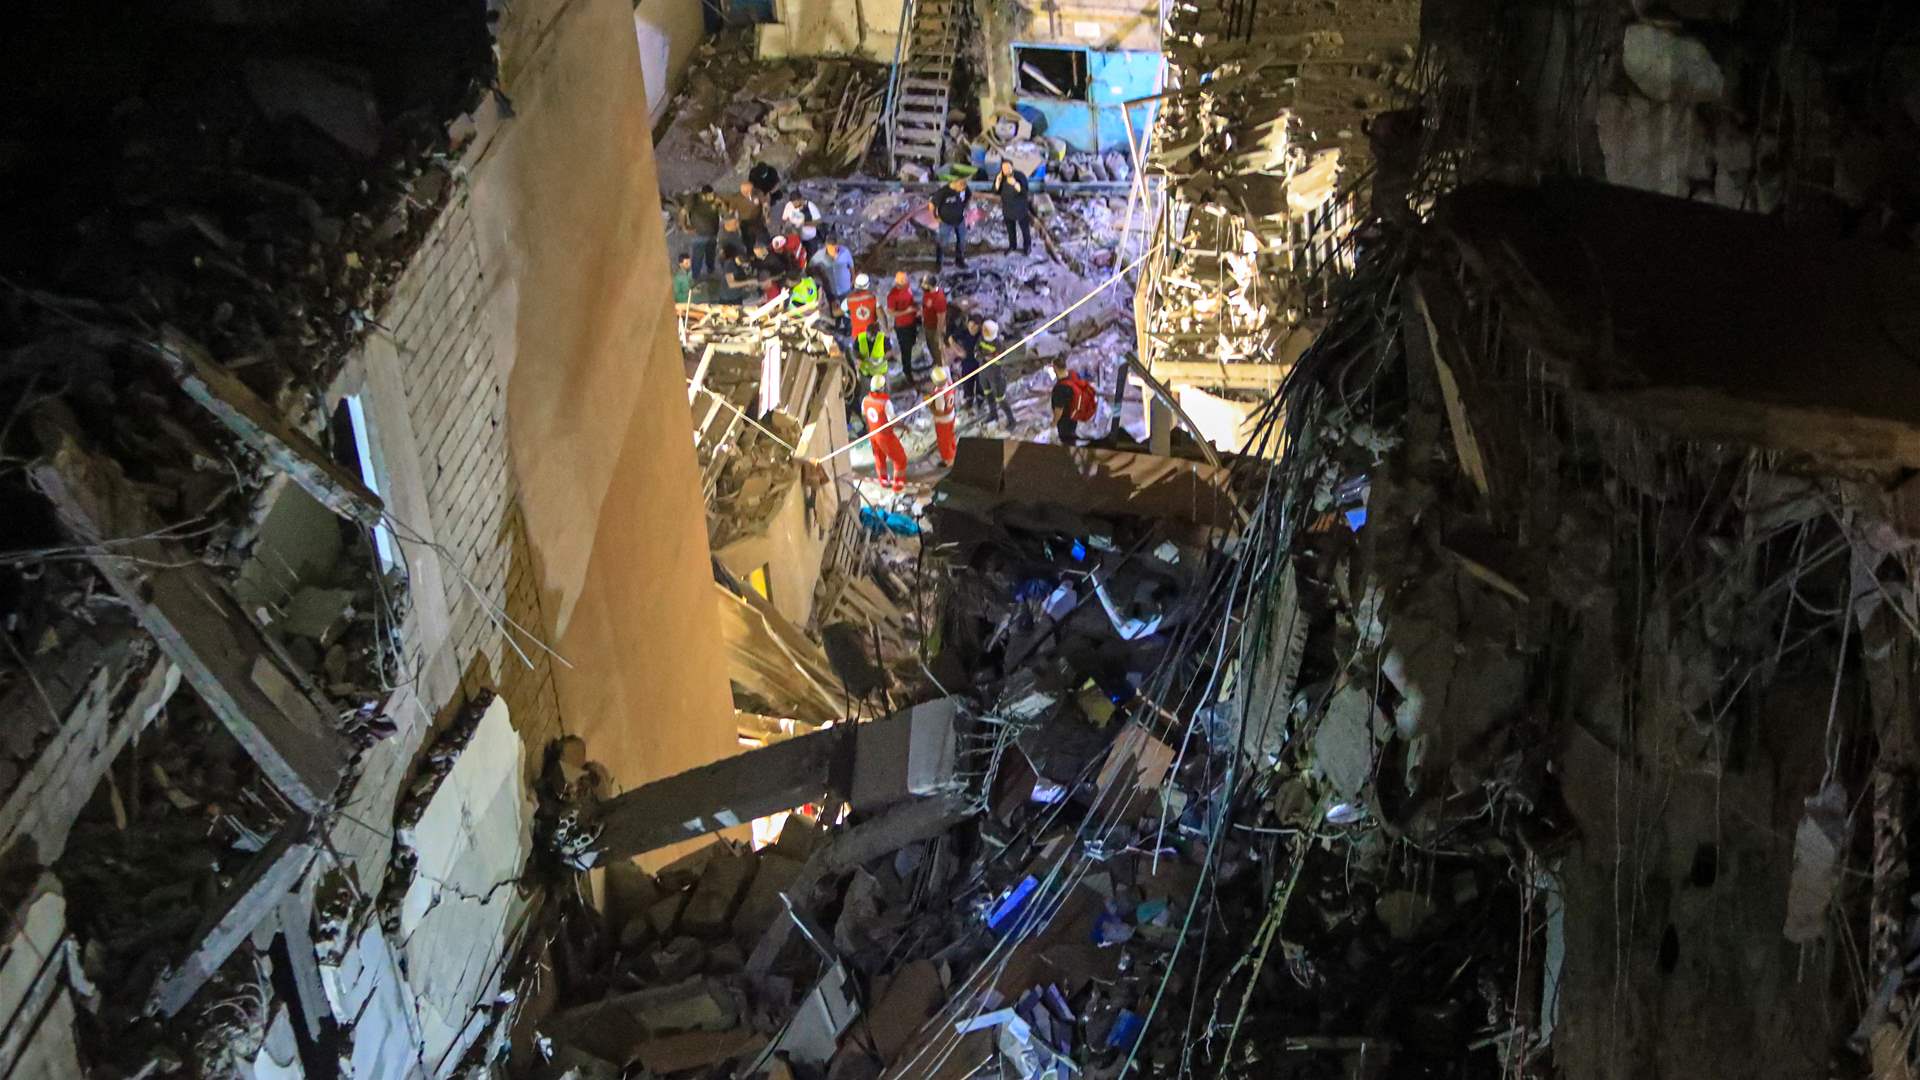 Fouad Shokor was present, bombs hit target precisely: Israel&#39;s Broadcasting Authority reports 